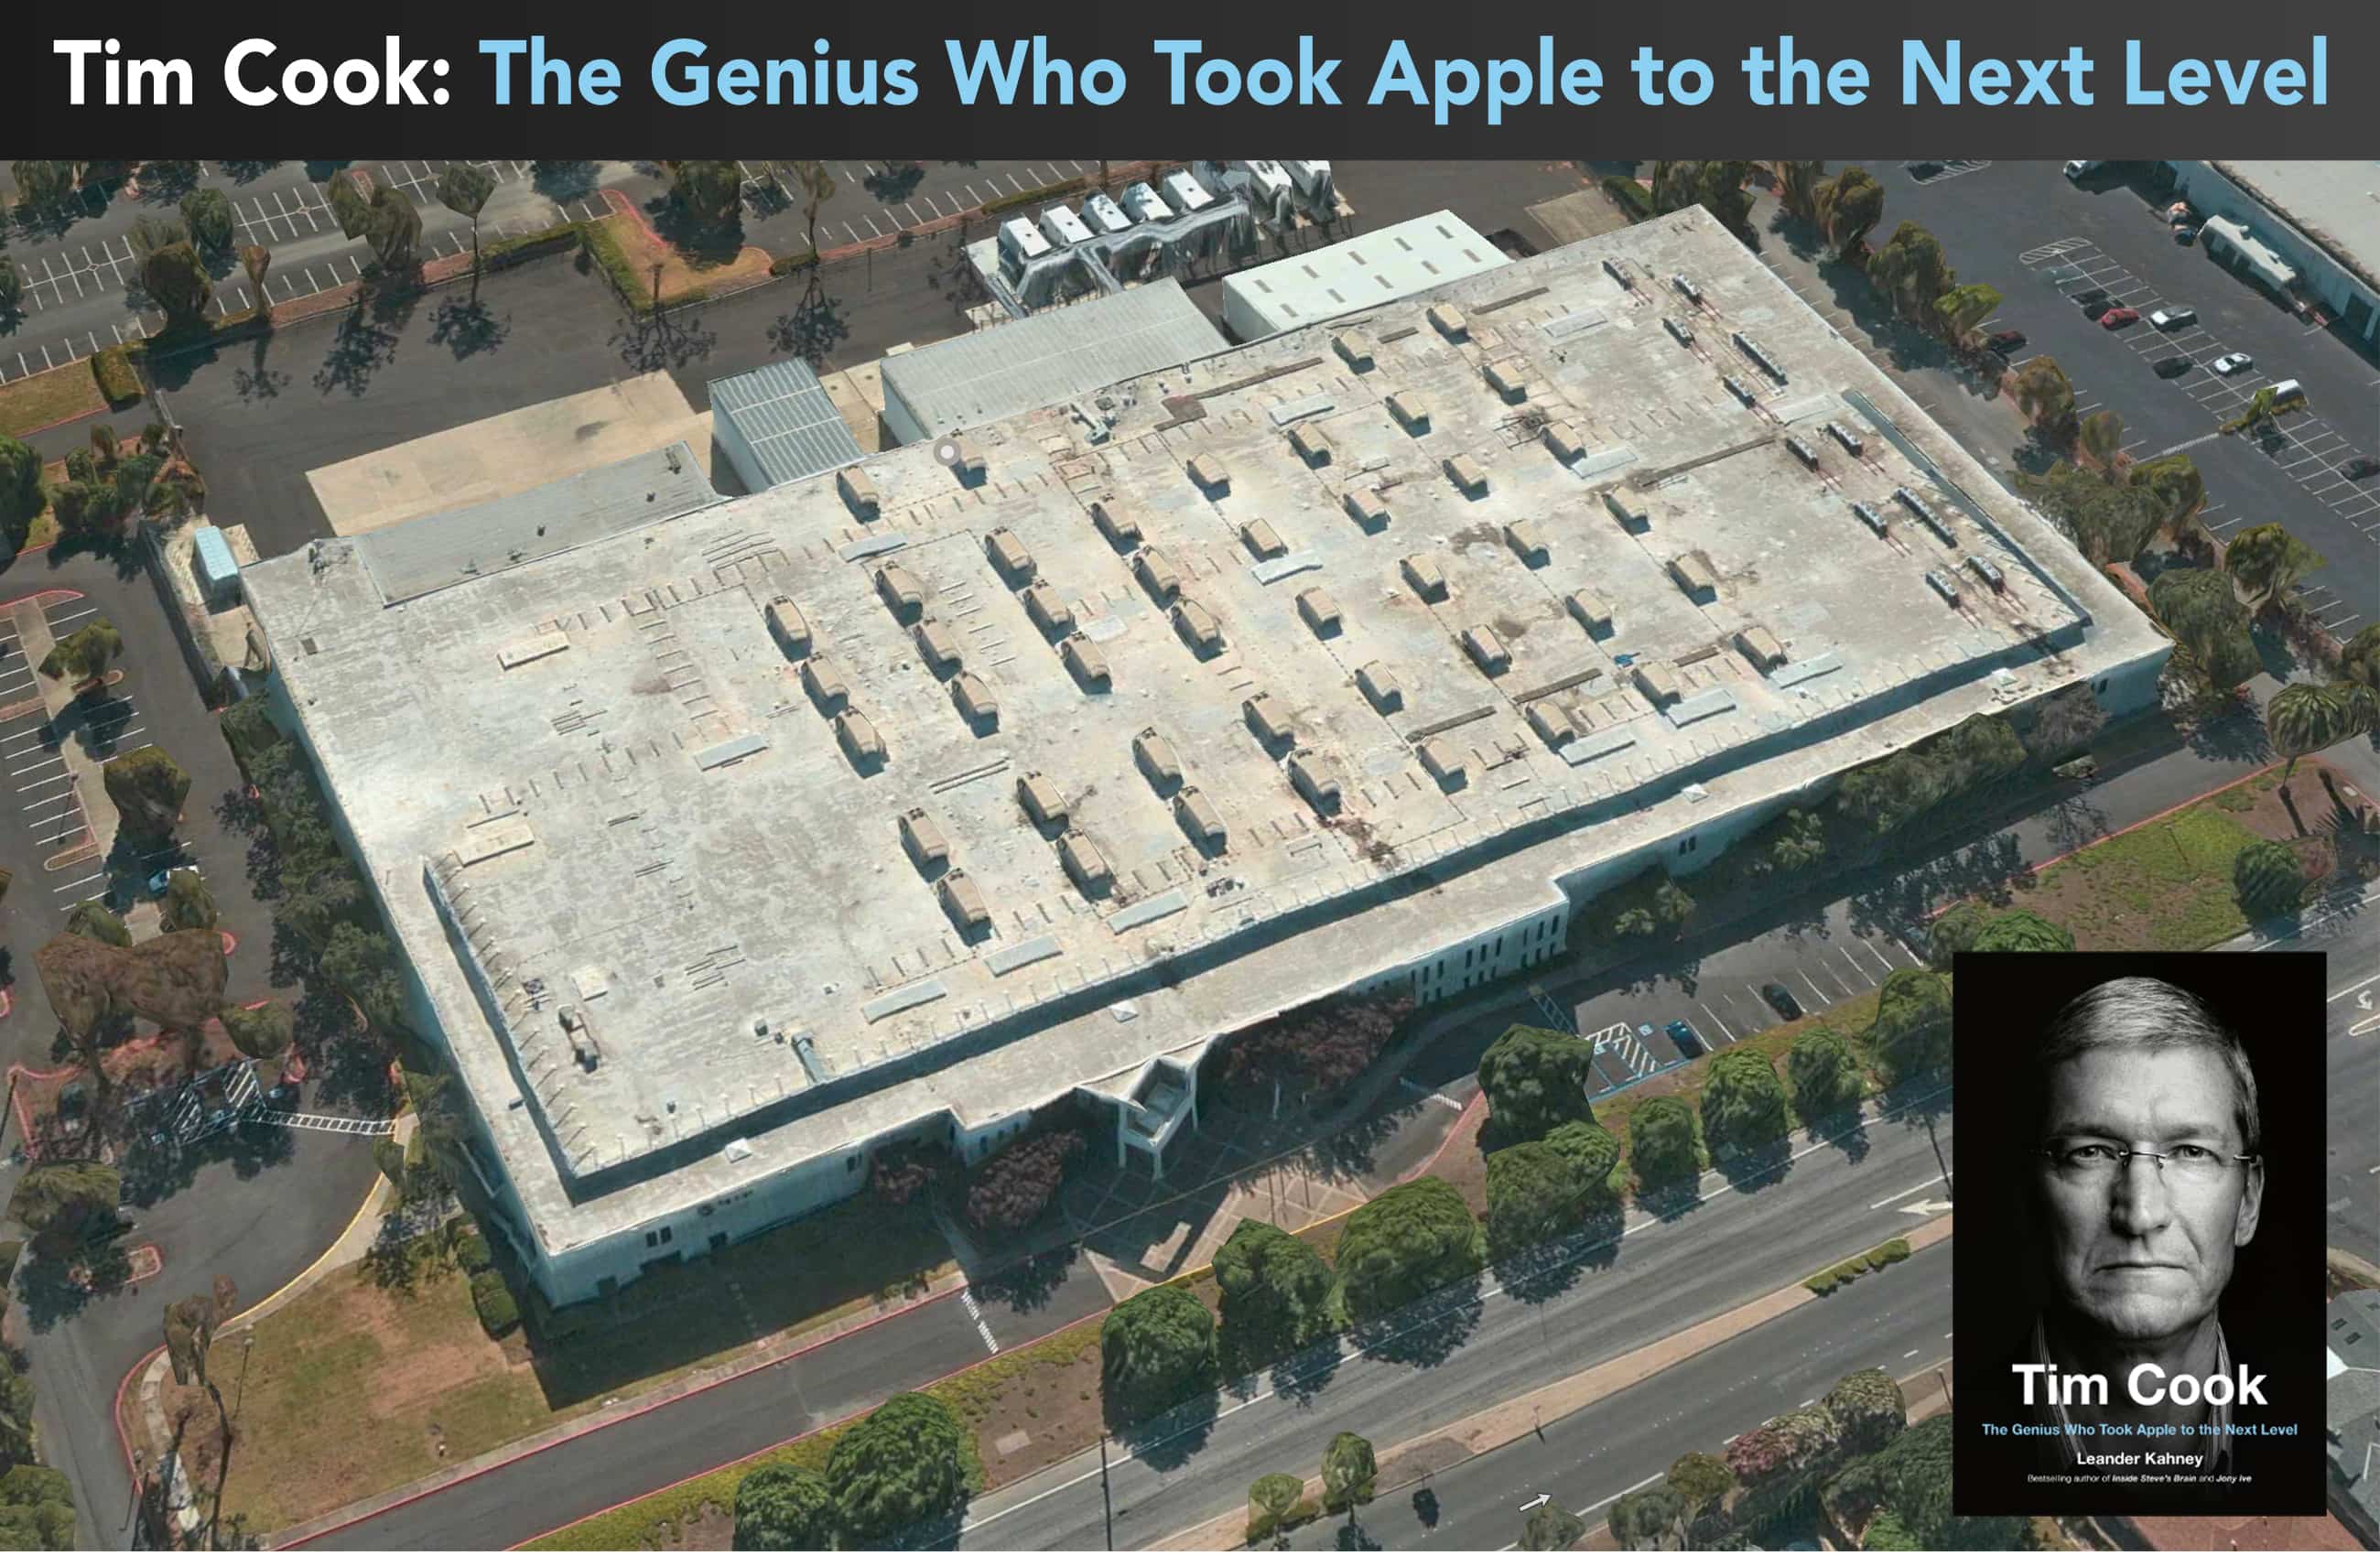 Apple Macintosh Factory of the future in Fremont